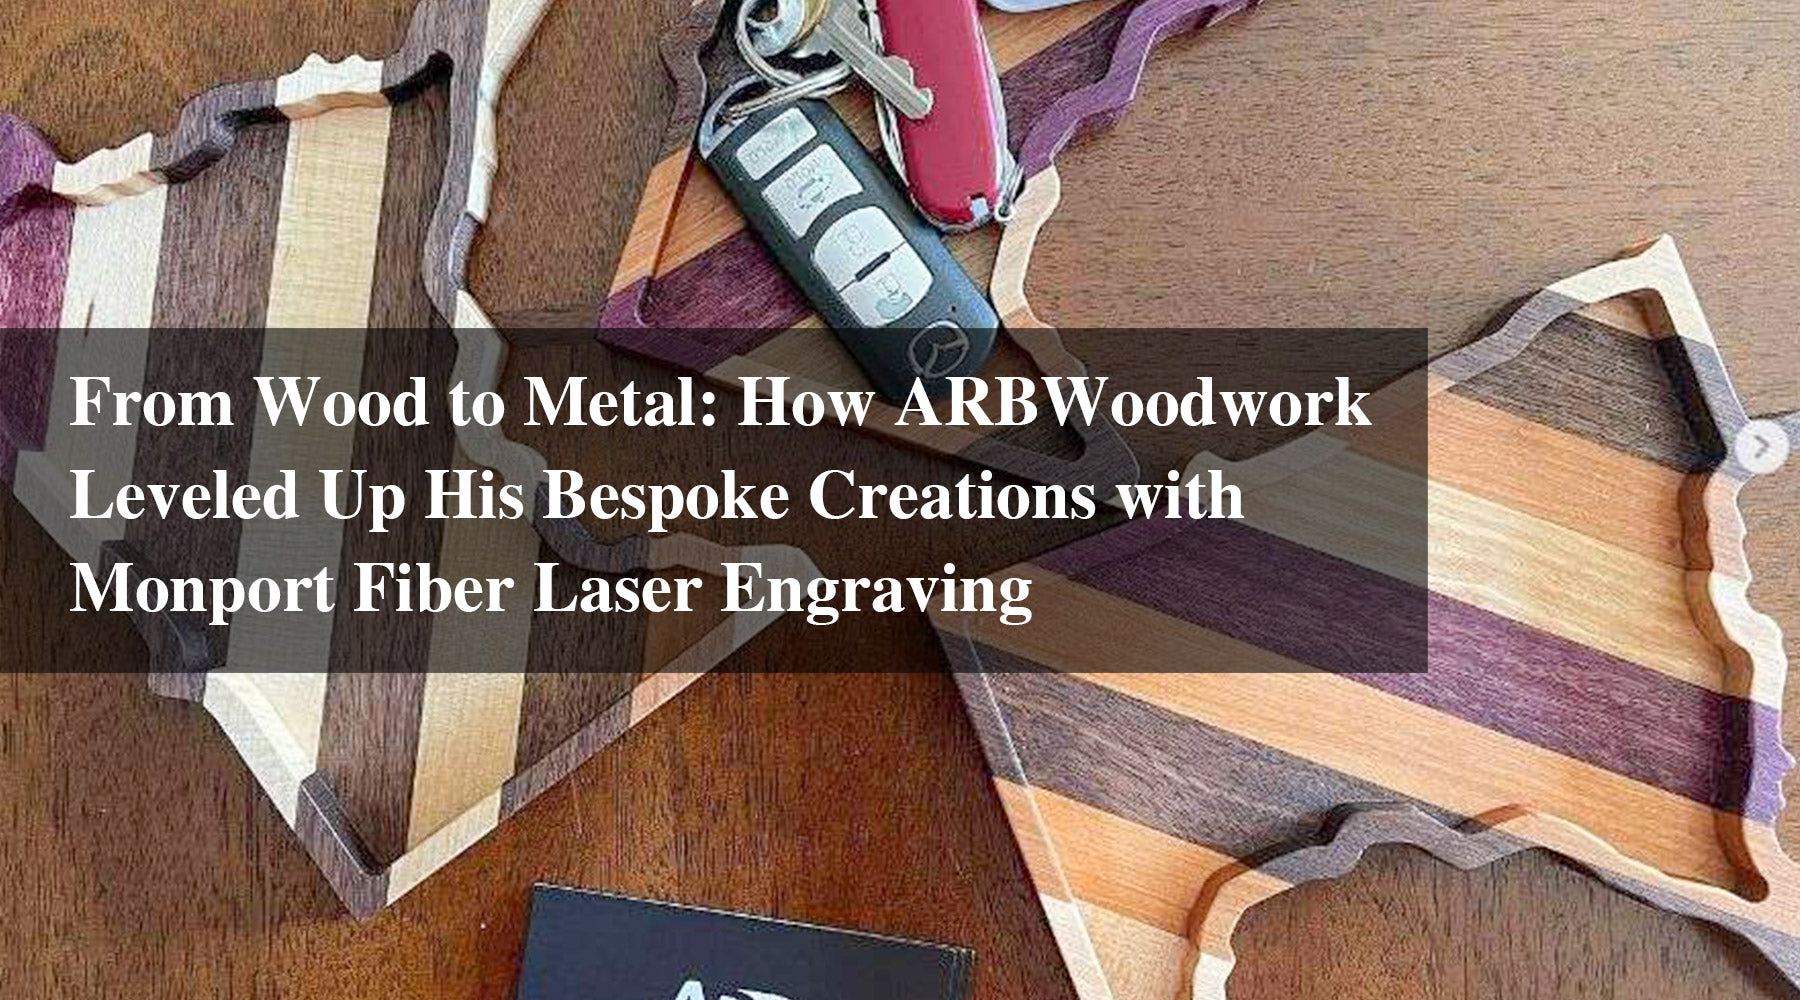 From Wood to Metal: How ARBWoodwork Leveled Up His Bespoke Creations with Monport Fiber Laser Engraving